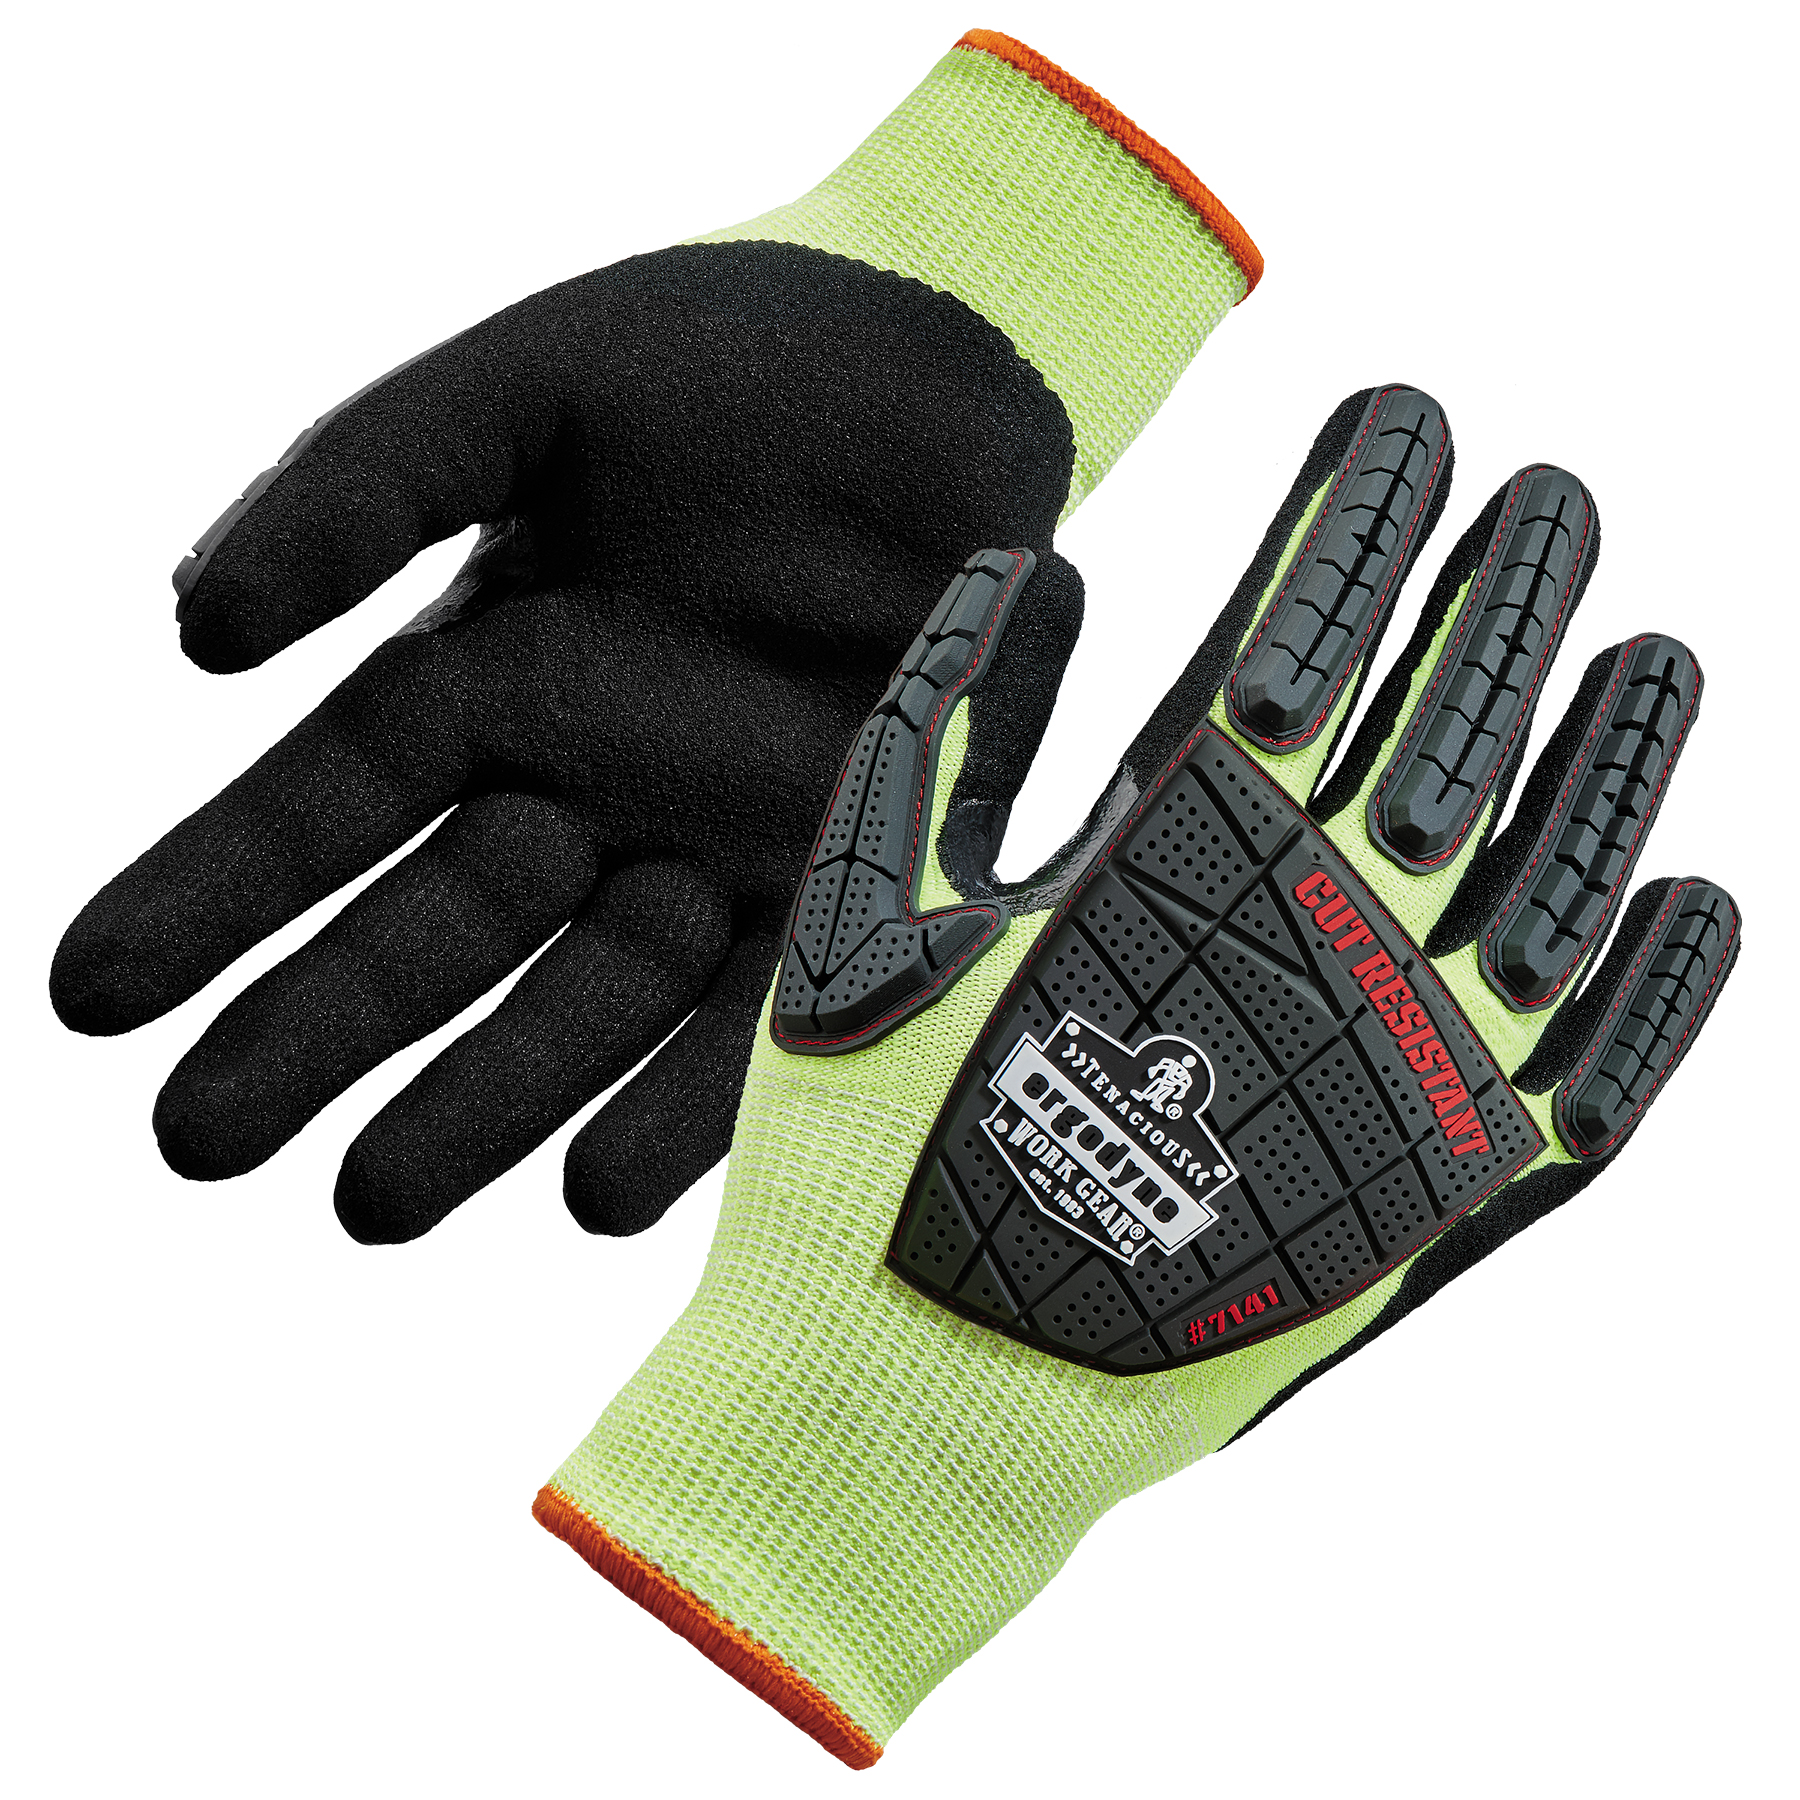 Vgo 1Pair Cut Resistant Gloves,Safety leather Work Gloves,Mechanic  Gloves,HPPE Anti-cut Liner,Hand Protection,EN388 level C, ANSI level